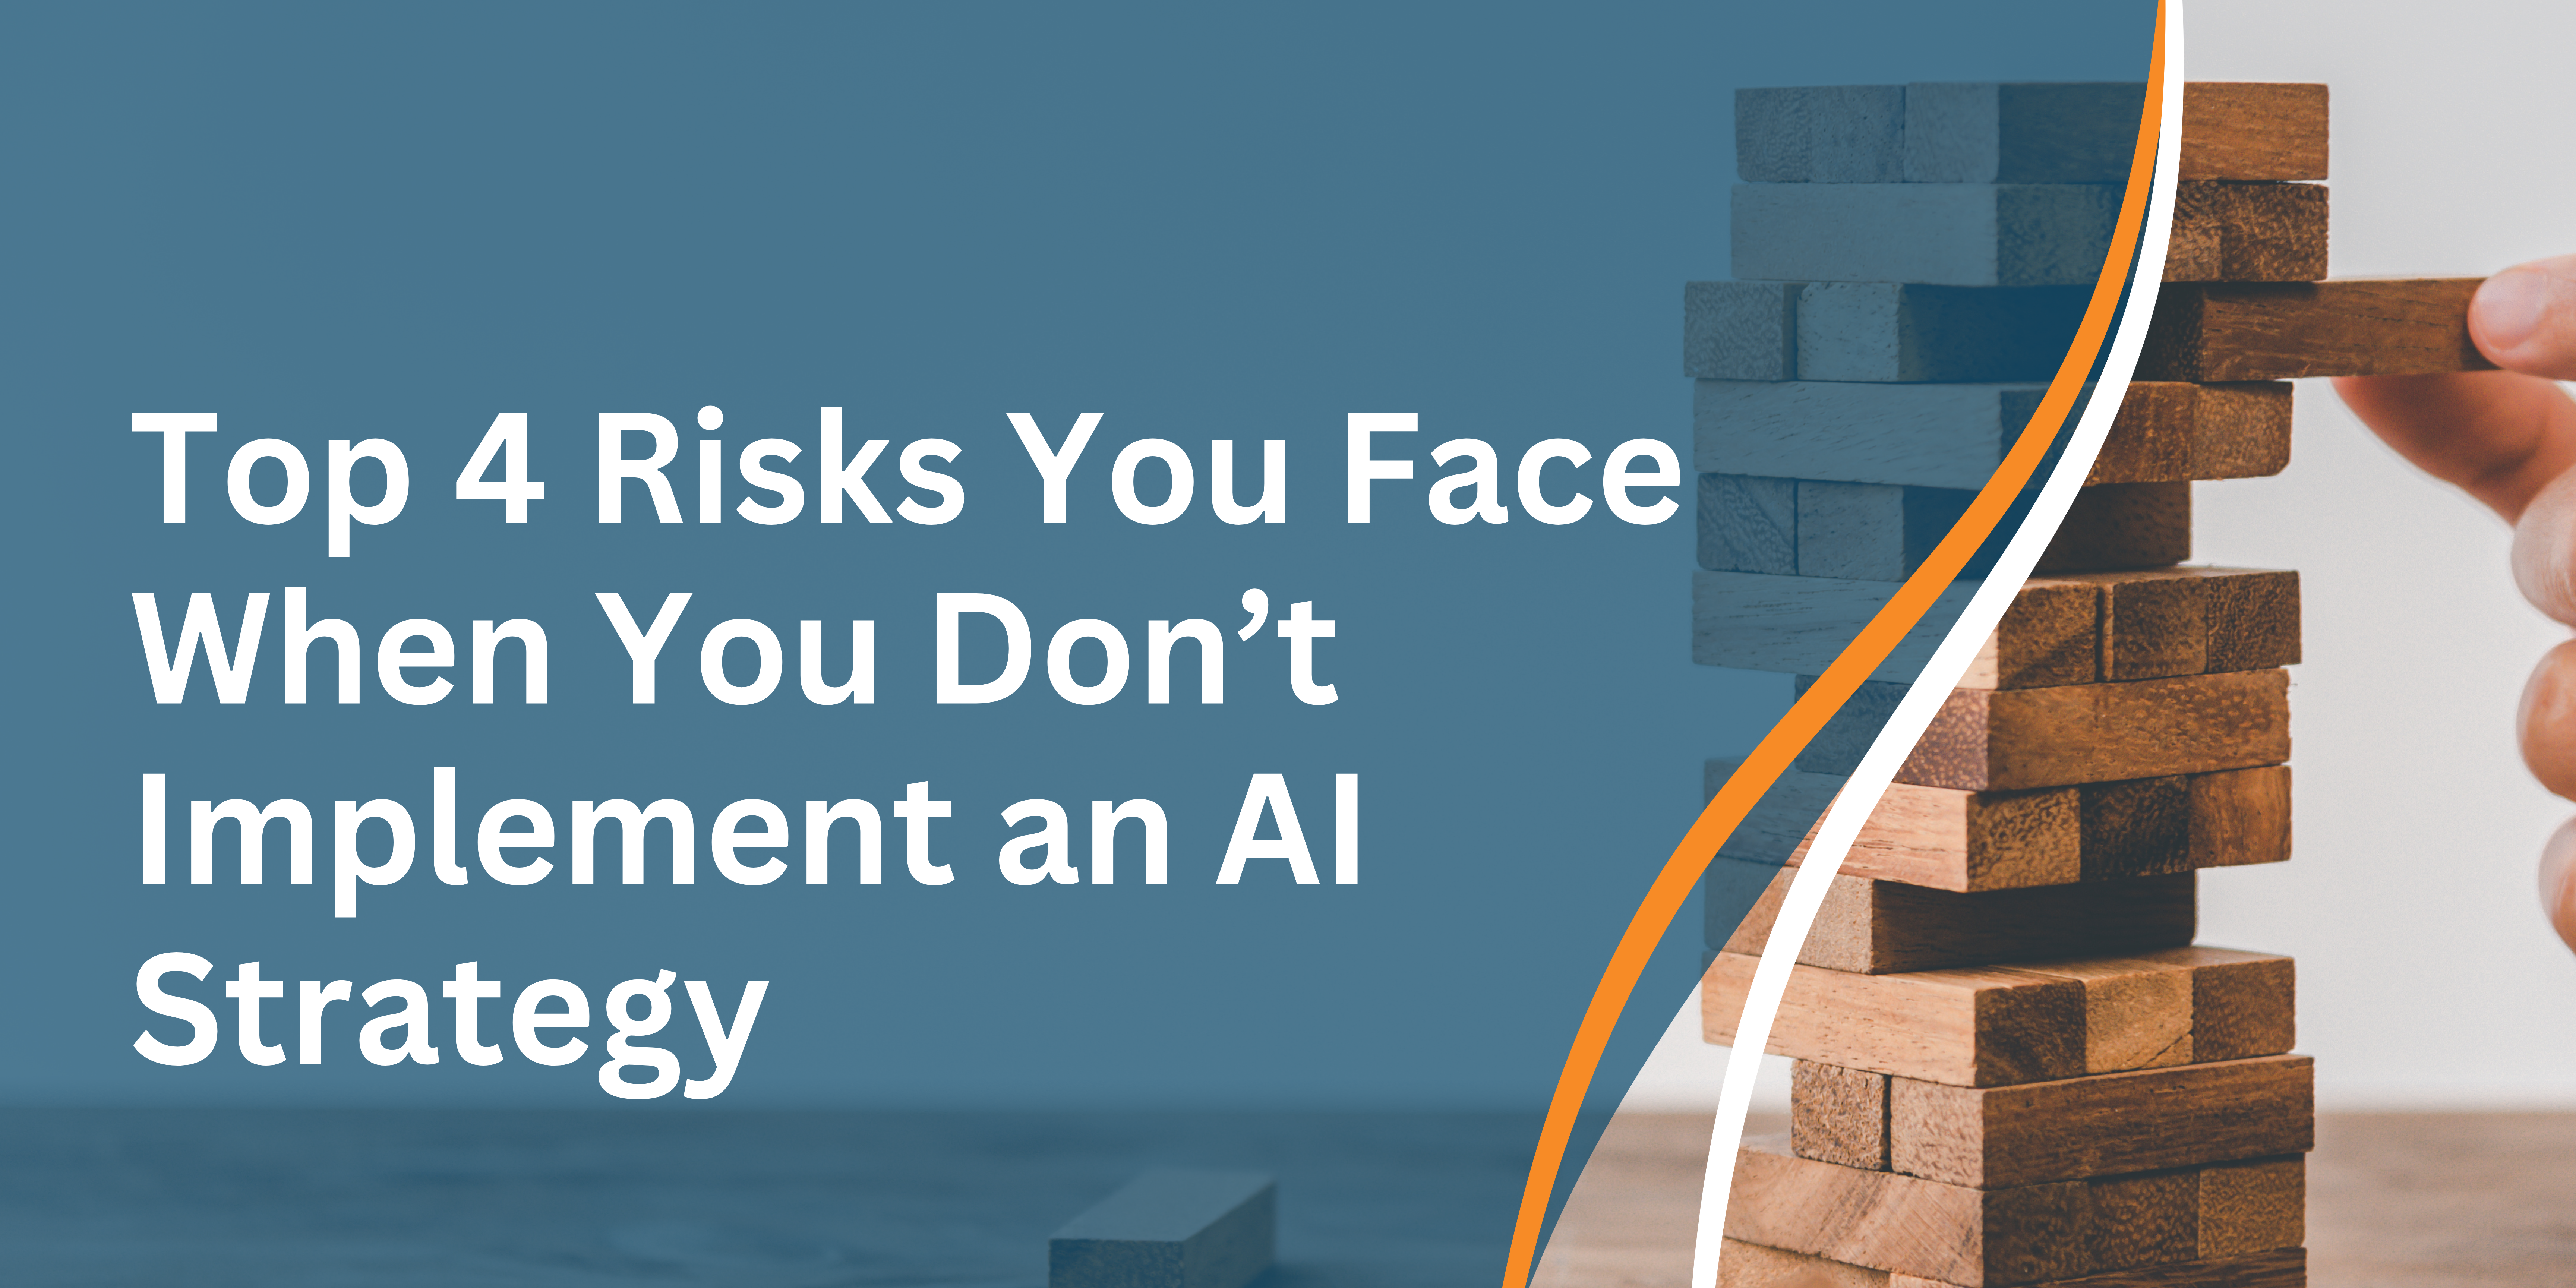 Top 4 Risks of Not Developing an AI Strategy